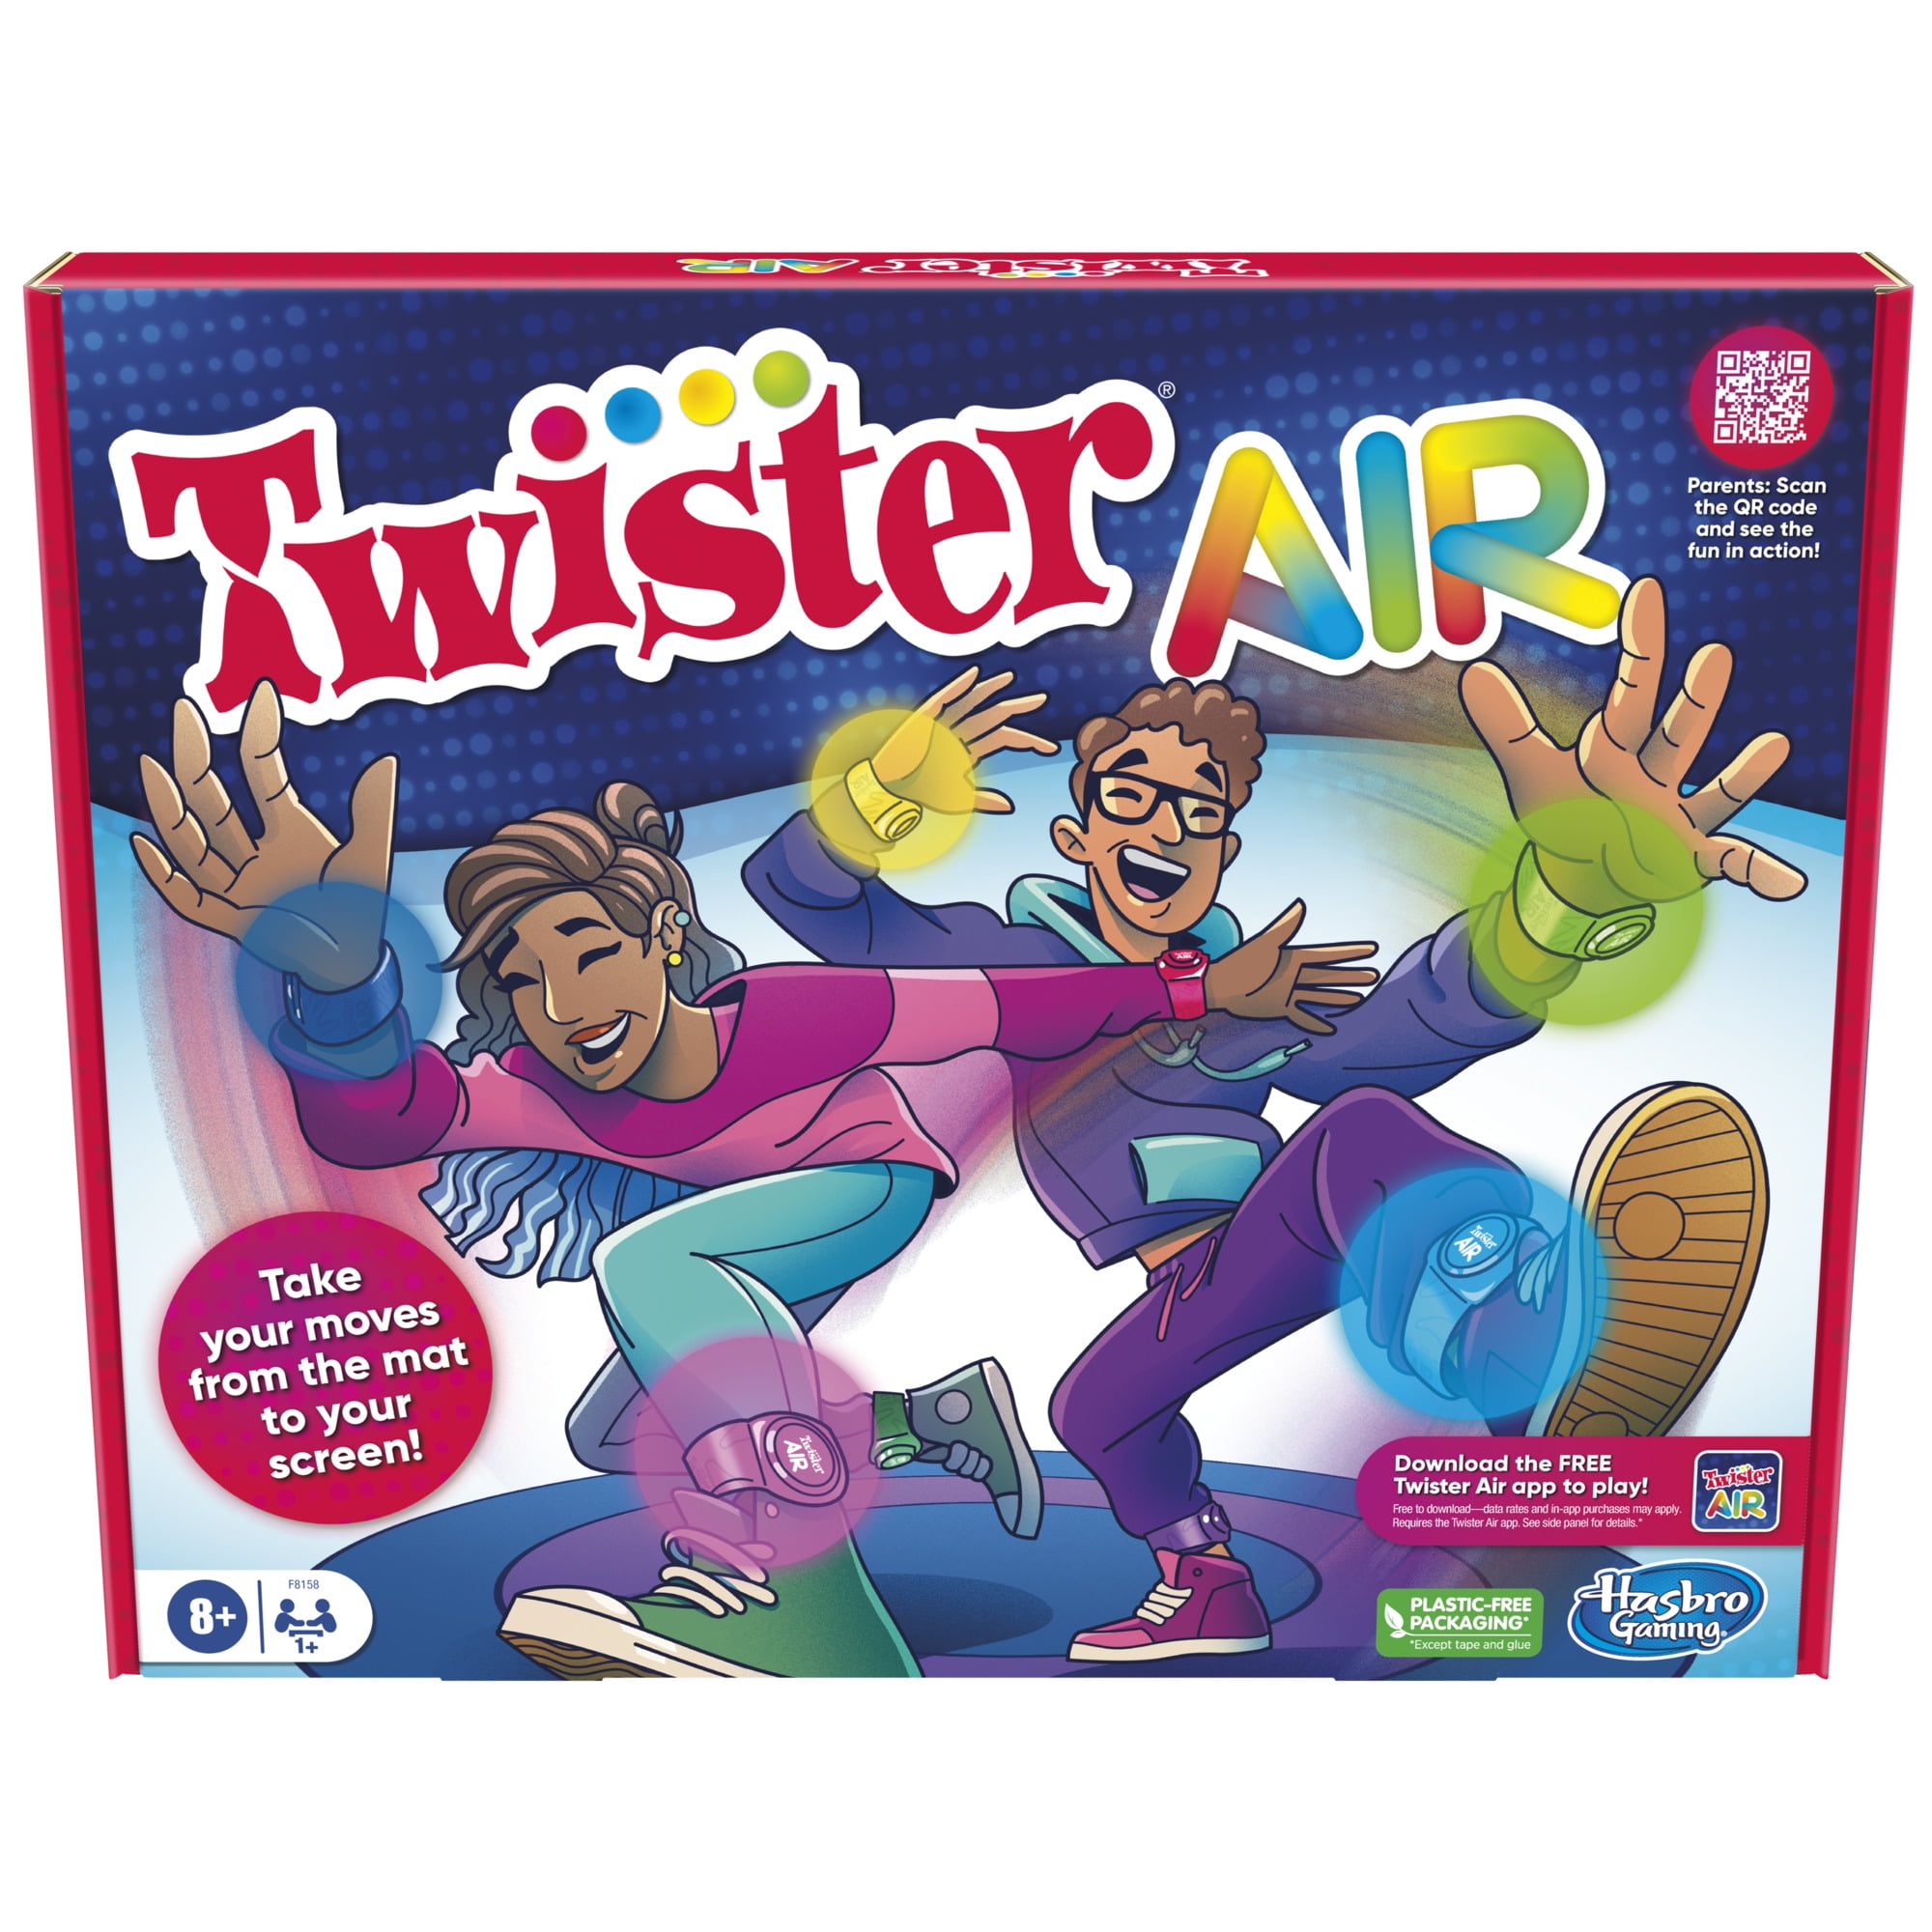 Twister Air Adds An AR Twist To The Classic Game - VRScout